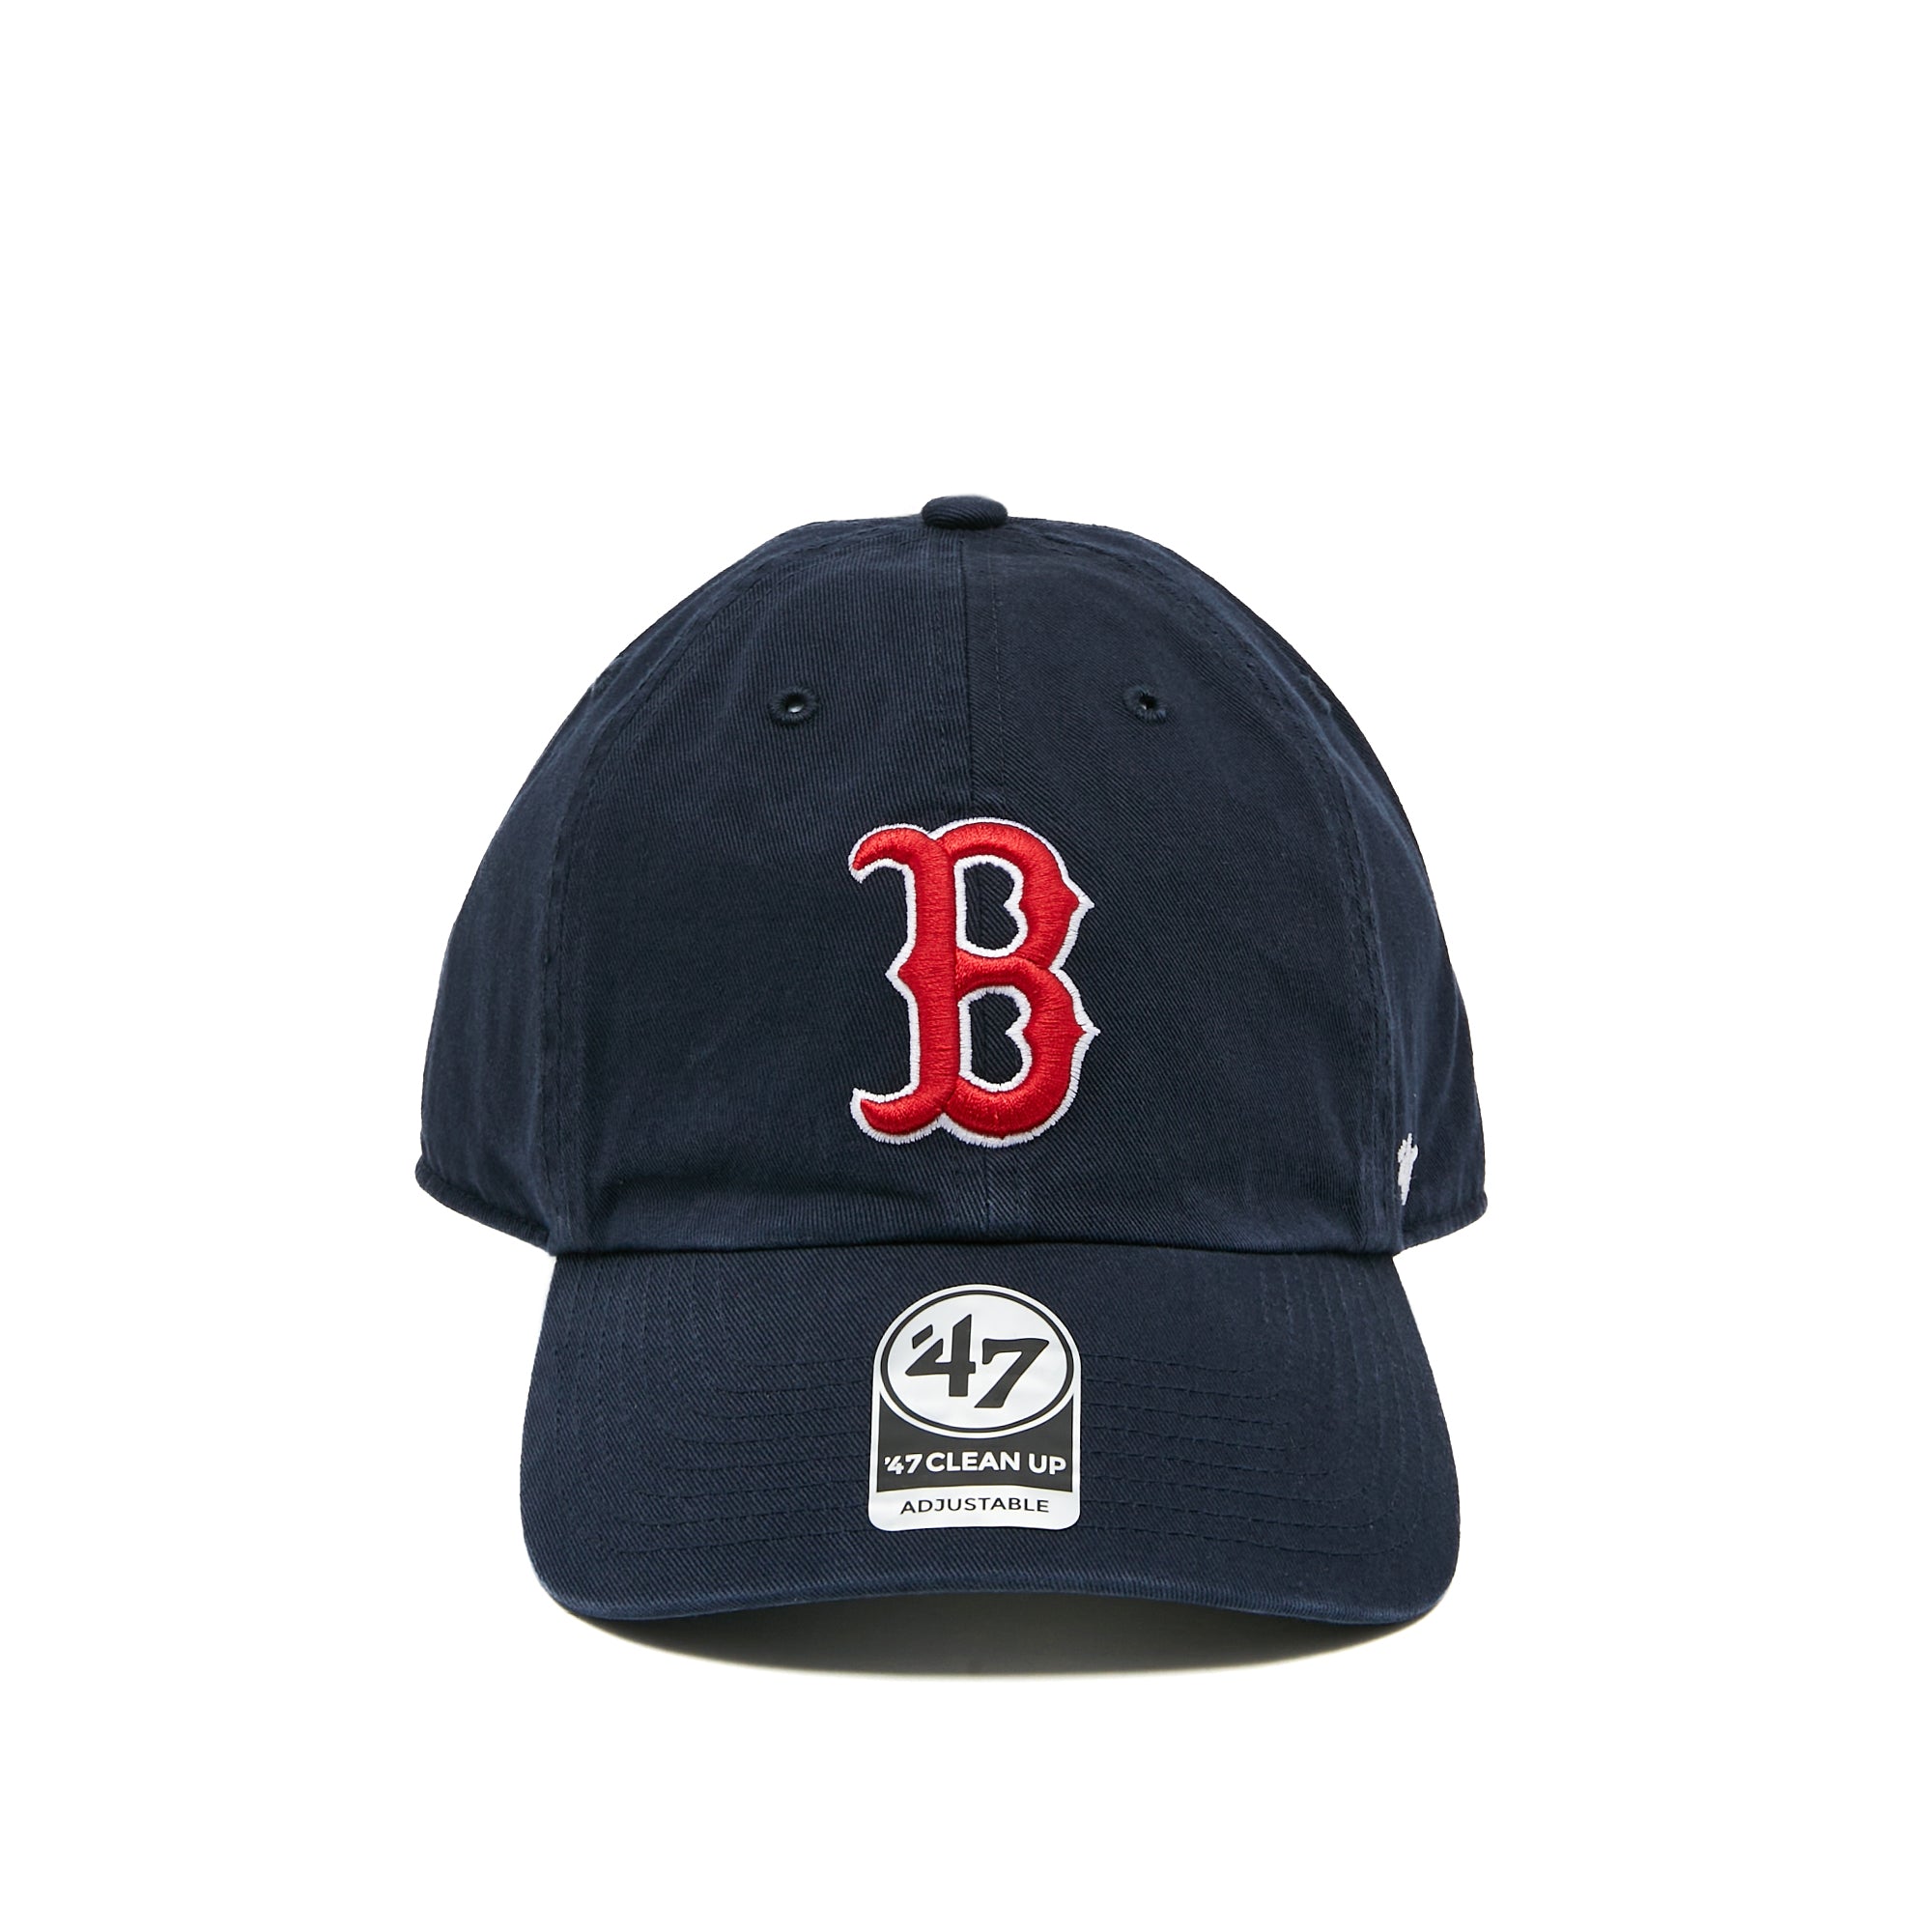 MLB Boston Red Sox '47 Clean Up Cap Navy One Size